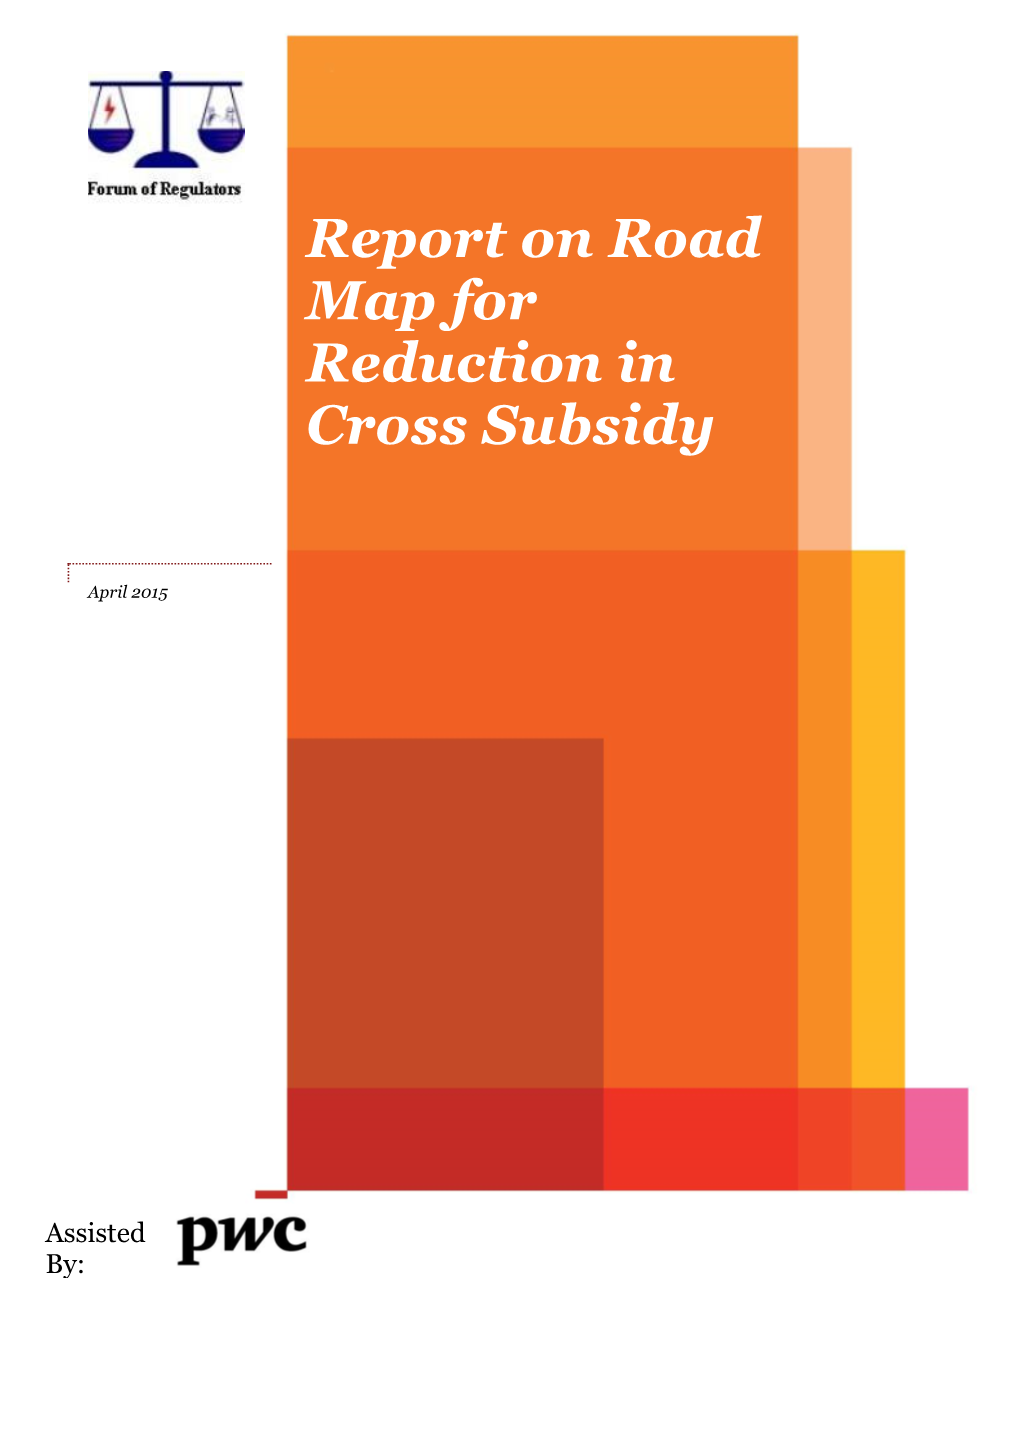 Report on Road Map for Reduction in Cross Subsidy